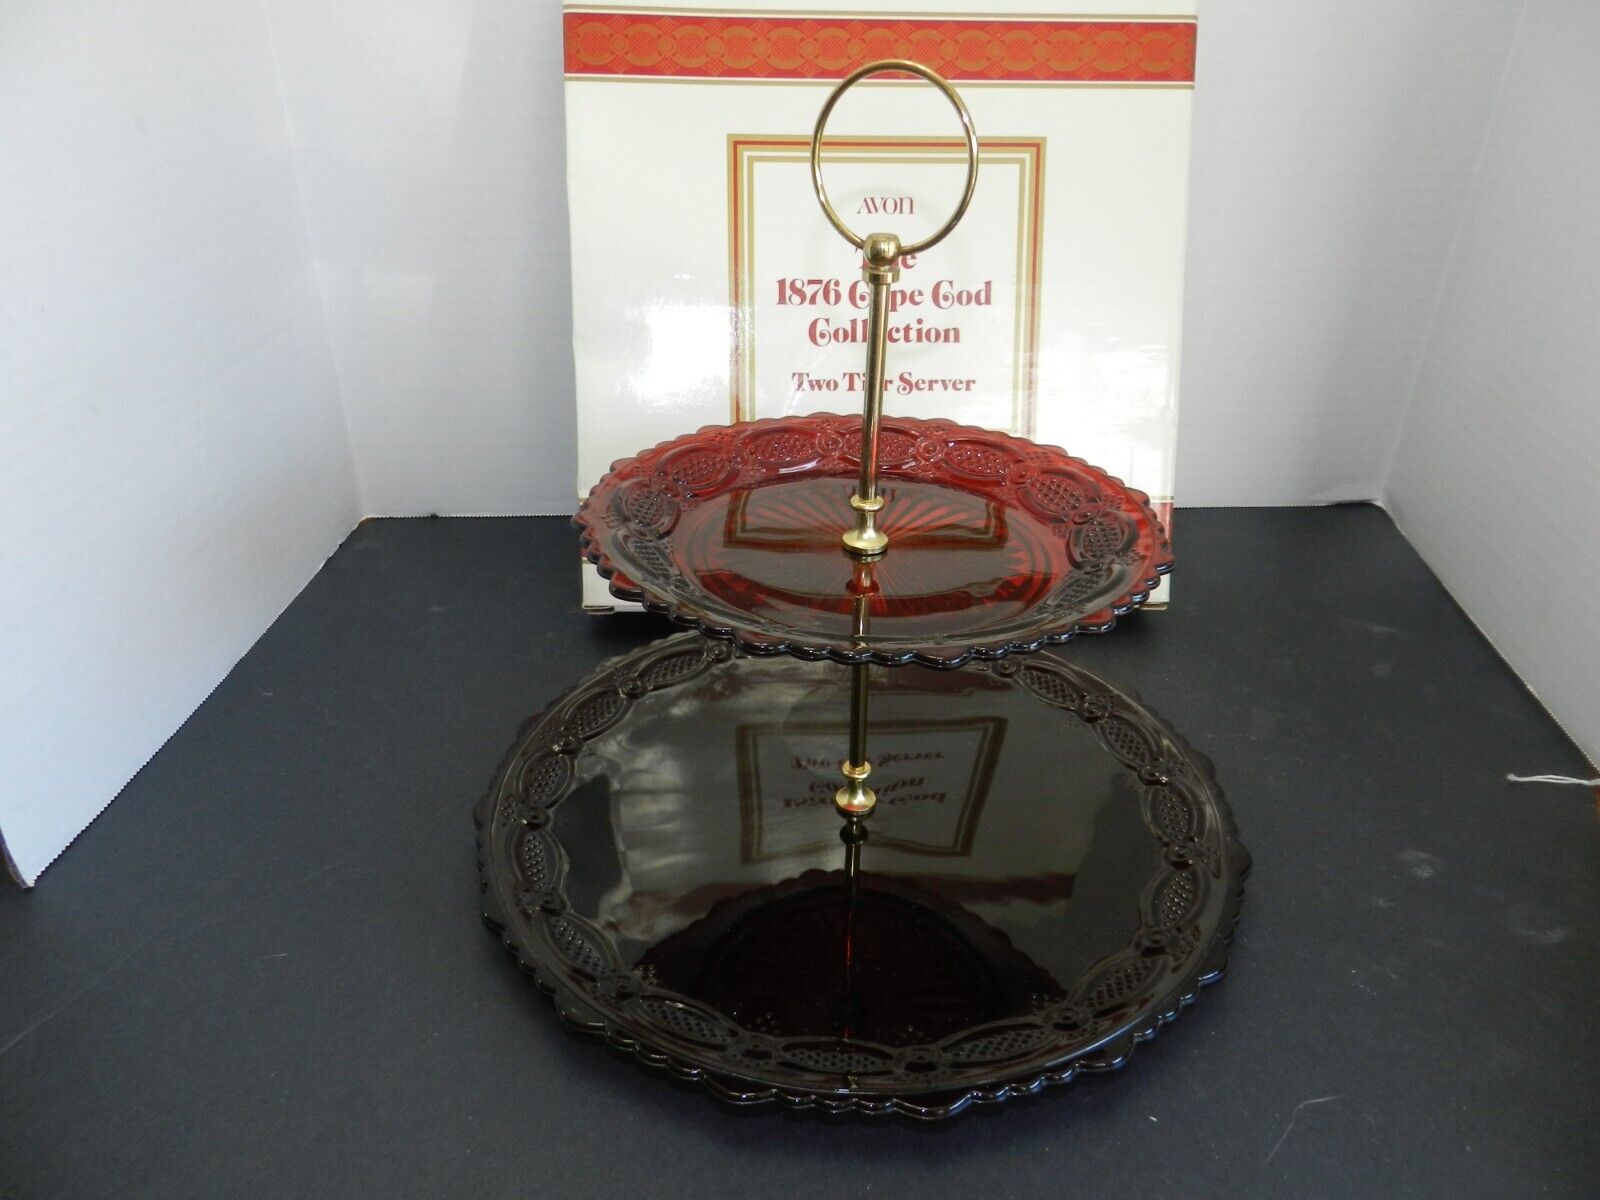 Vtg - Avon 1876 Cape Cod Ruby Red Collection 2-Tier Server Dish